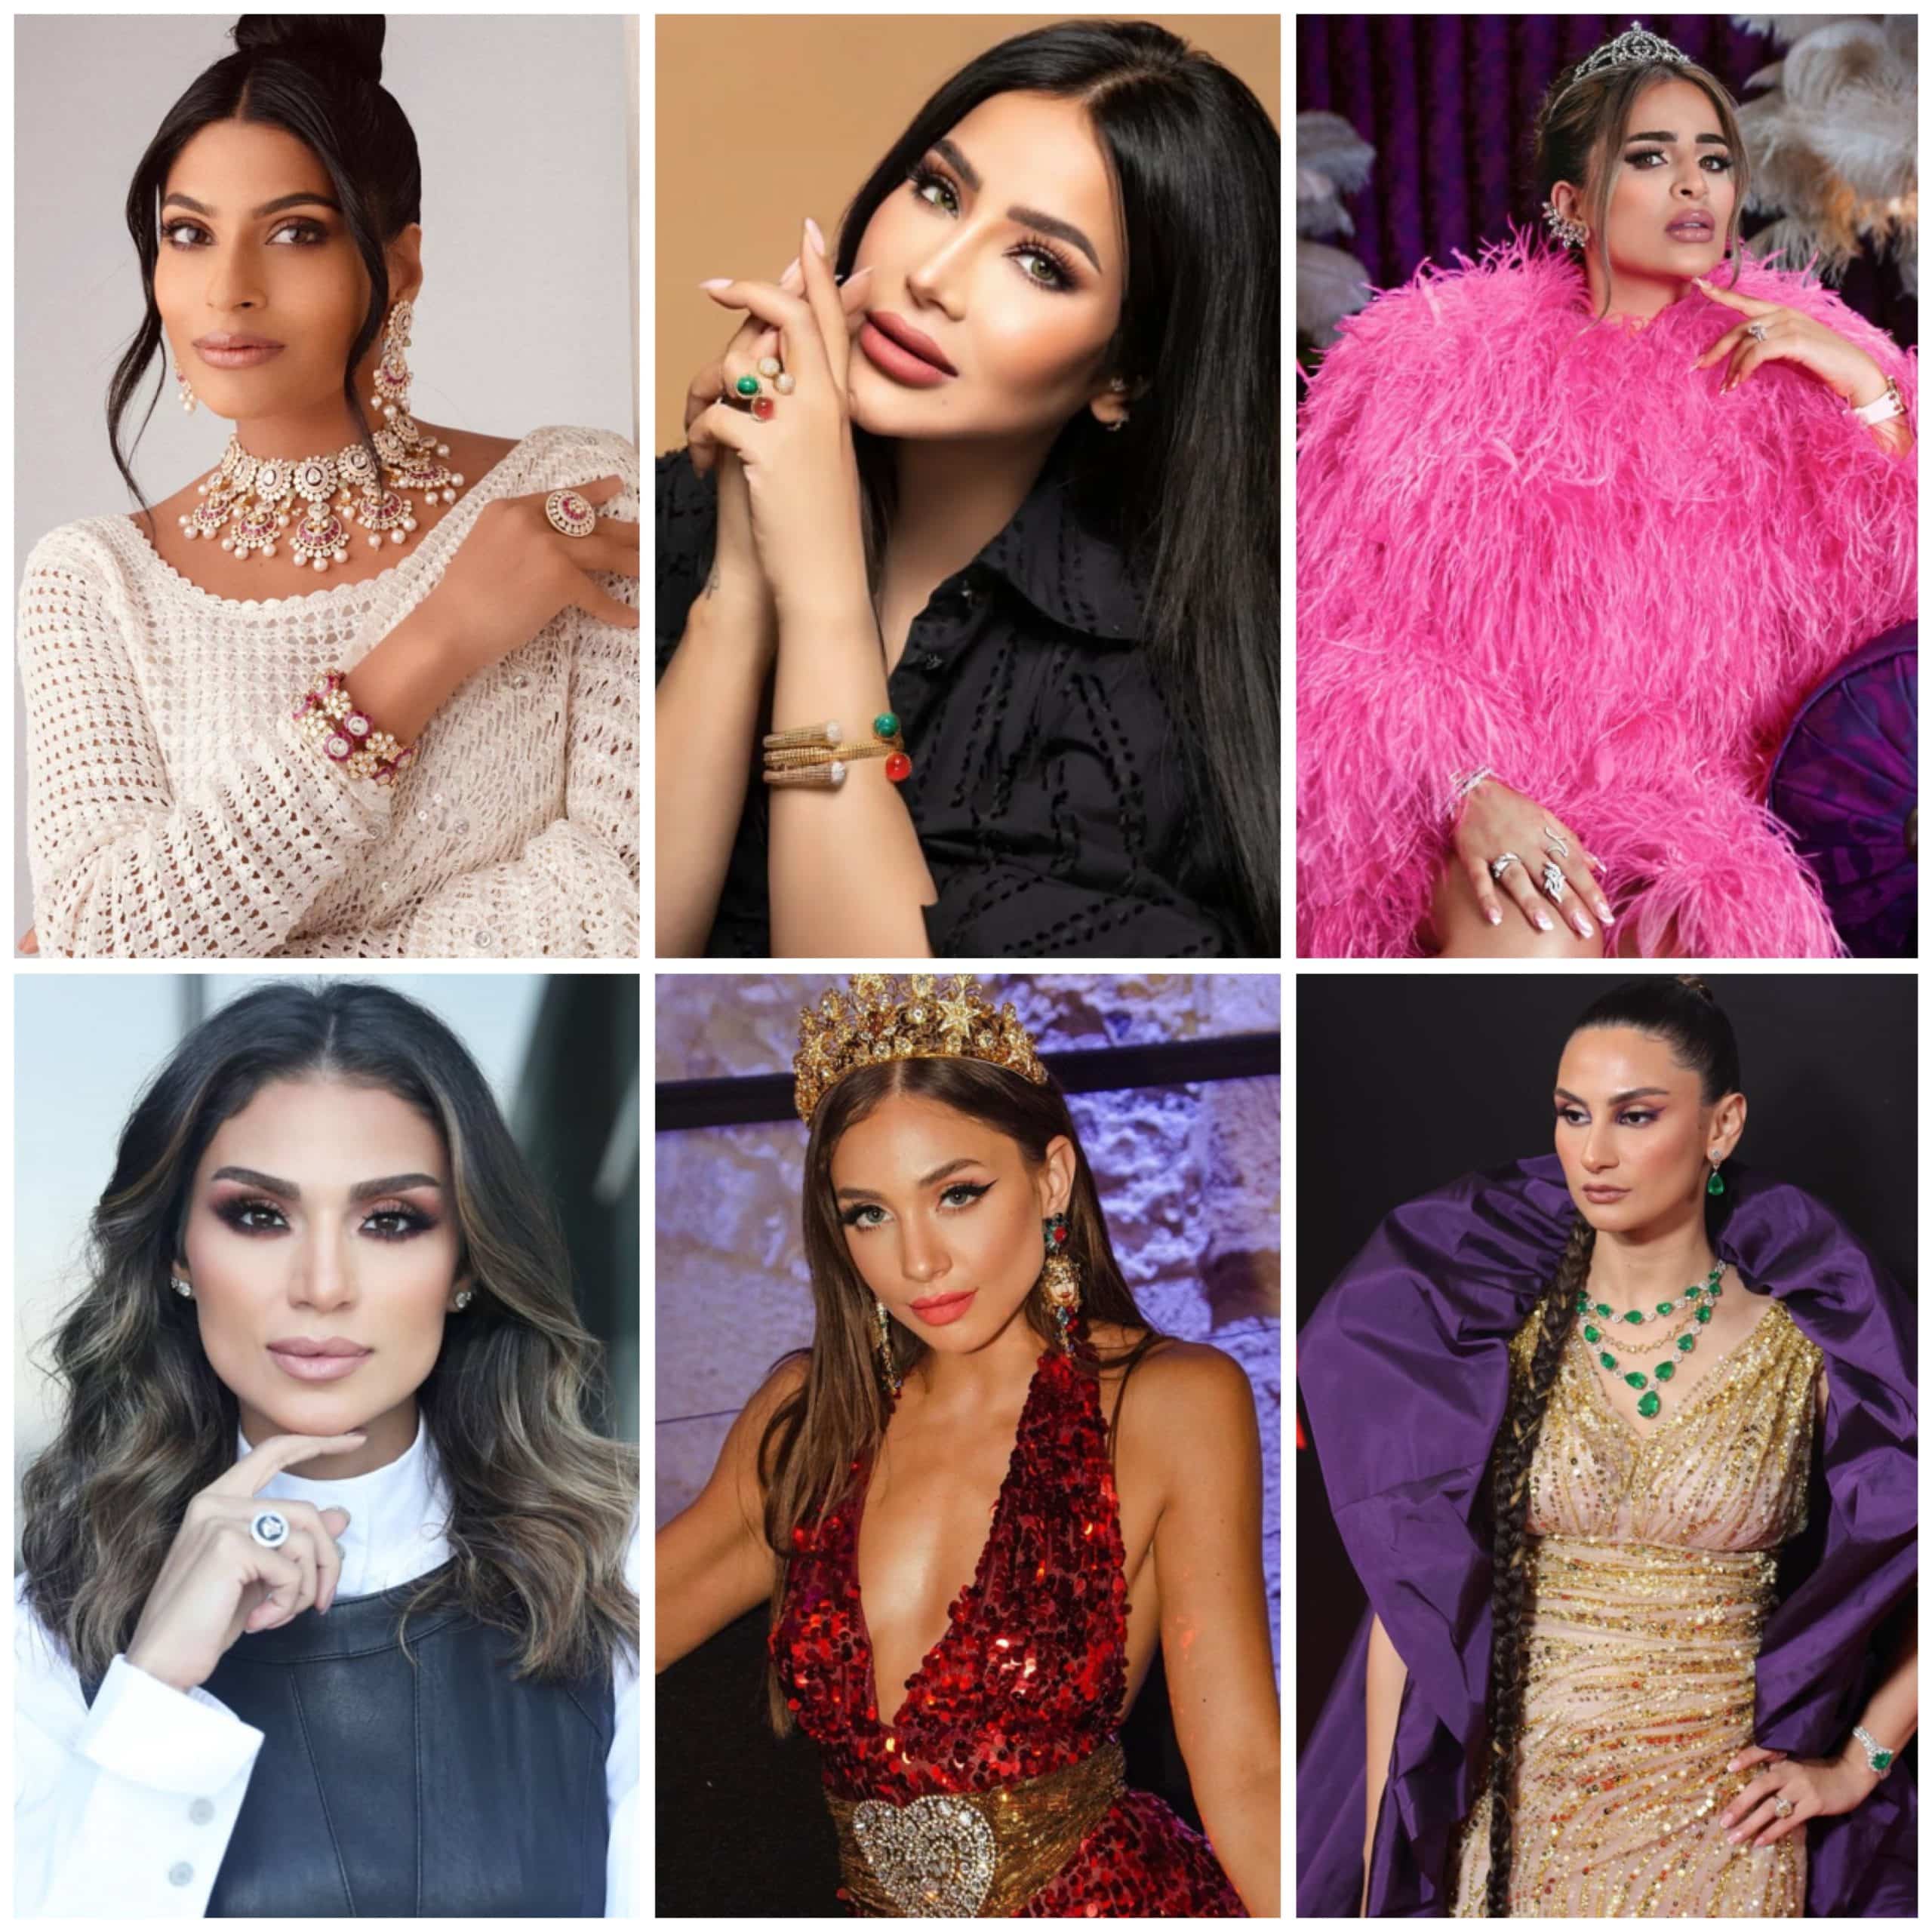 Read more about the article The Women of Dubai Bling and Their Handbags